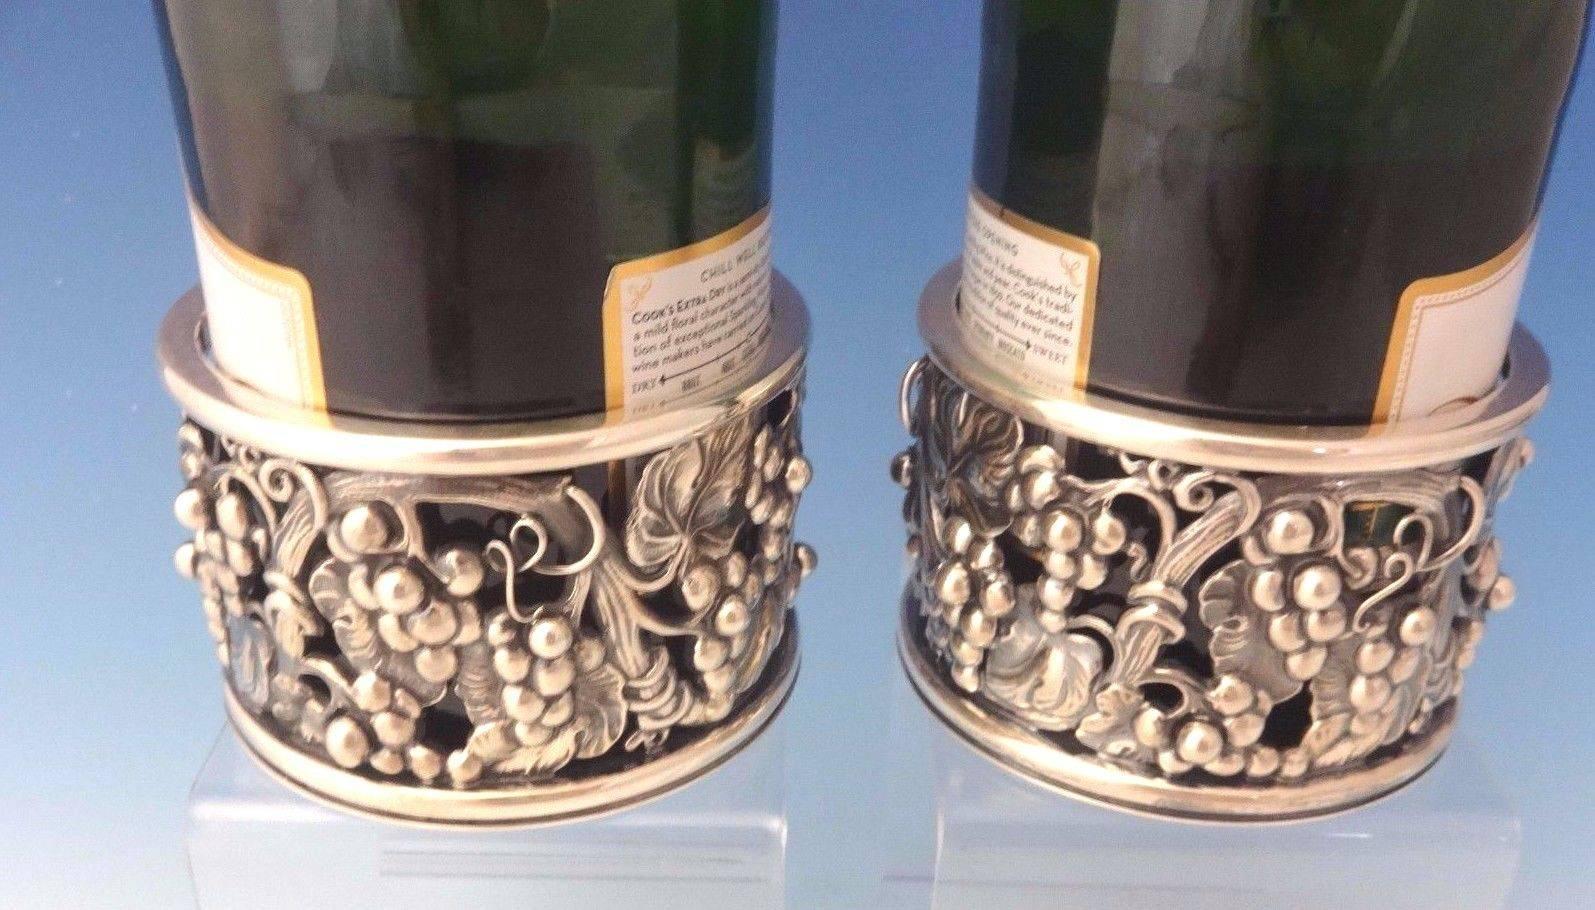 Evald Nielsen:

This pair of sterling wine coasters was made by Evald Nielsen with a beautiful pierced grape motif. The pair dates from the 1970s. They measure 2 3/4